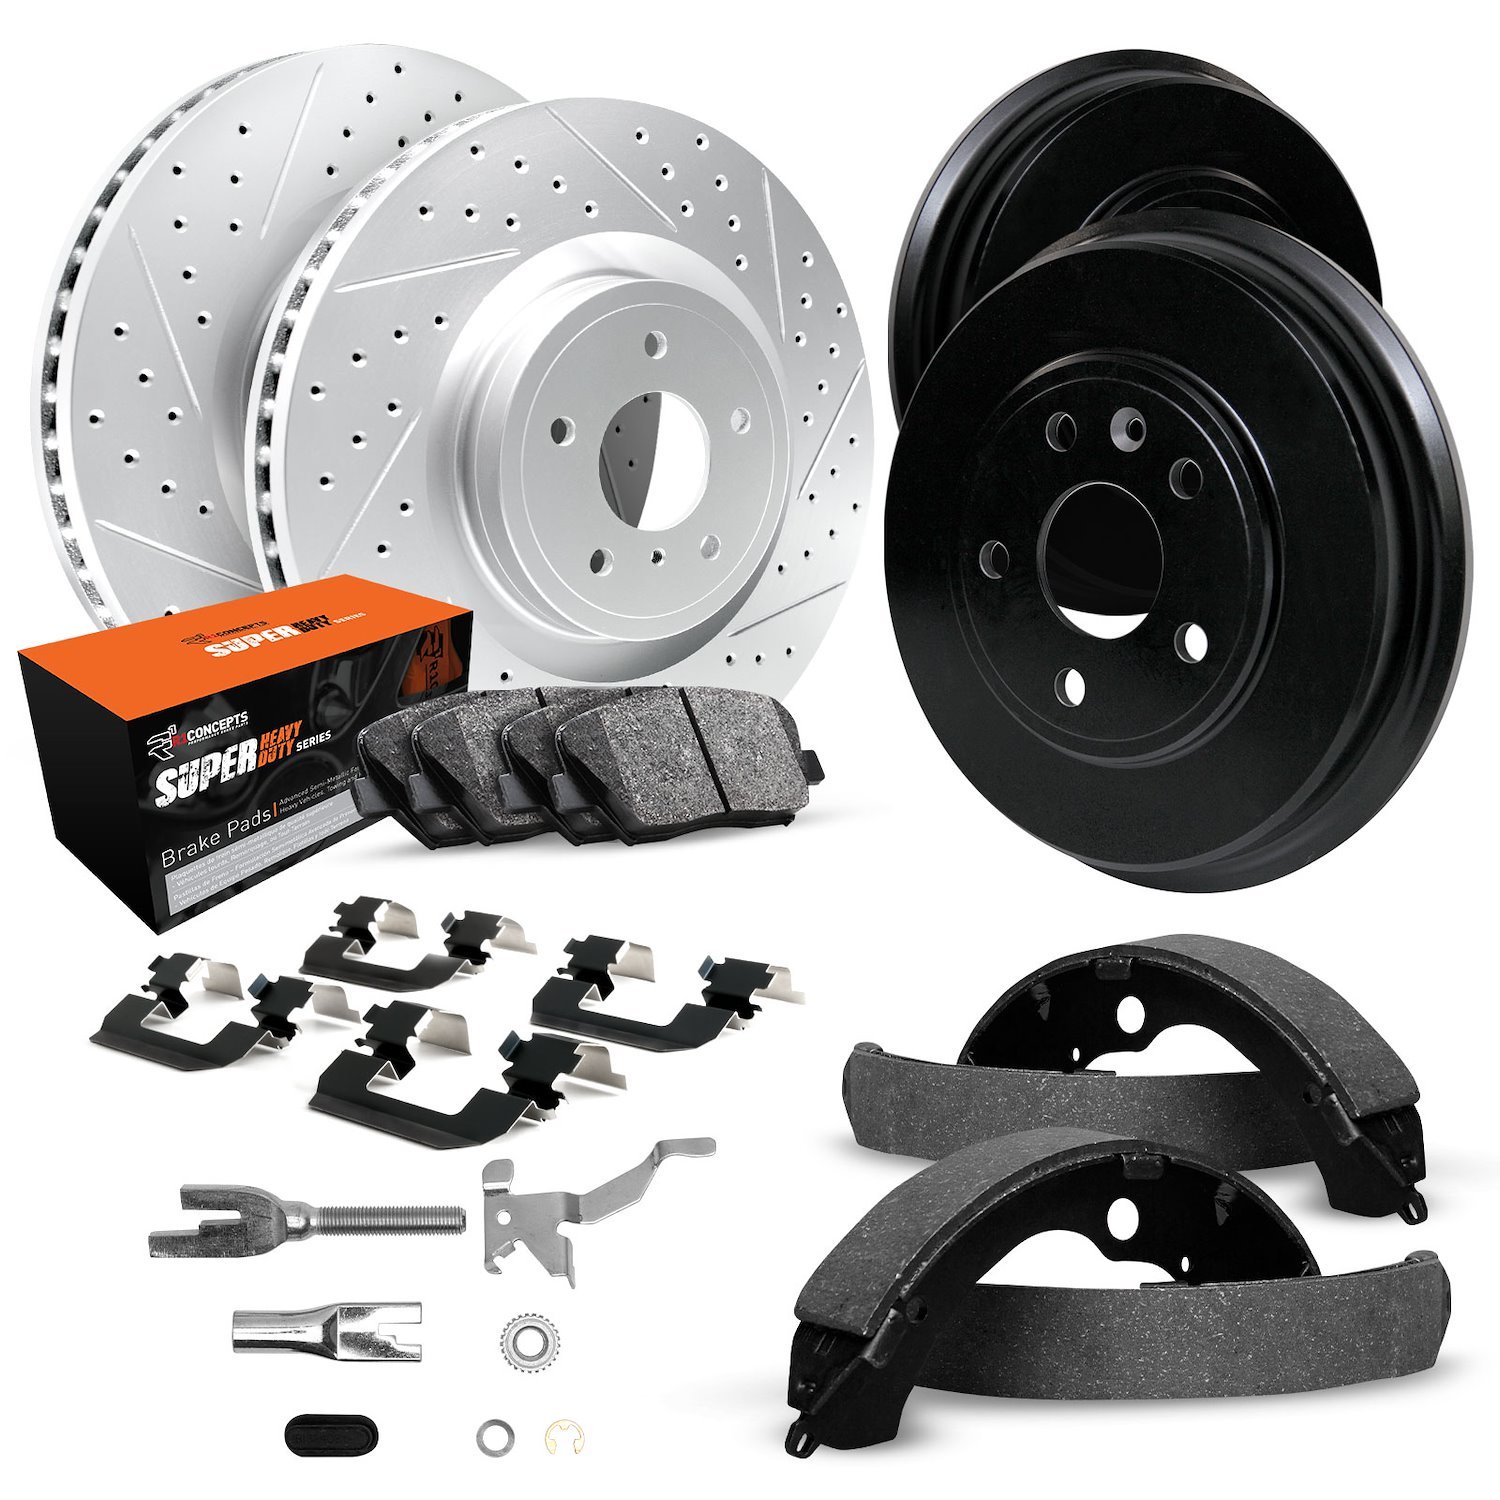 GEO-Carbon Drilled/Slotted Rotors/Drums w/Super-Duty Pads/Shoes/Hardware/Adjusters, 1972-1975 GM, Position: Front/Rear